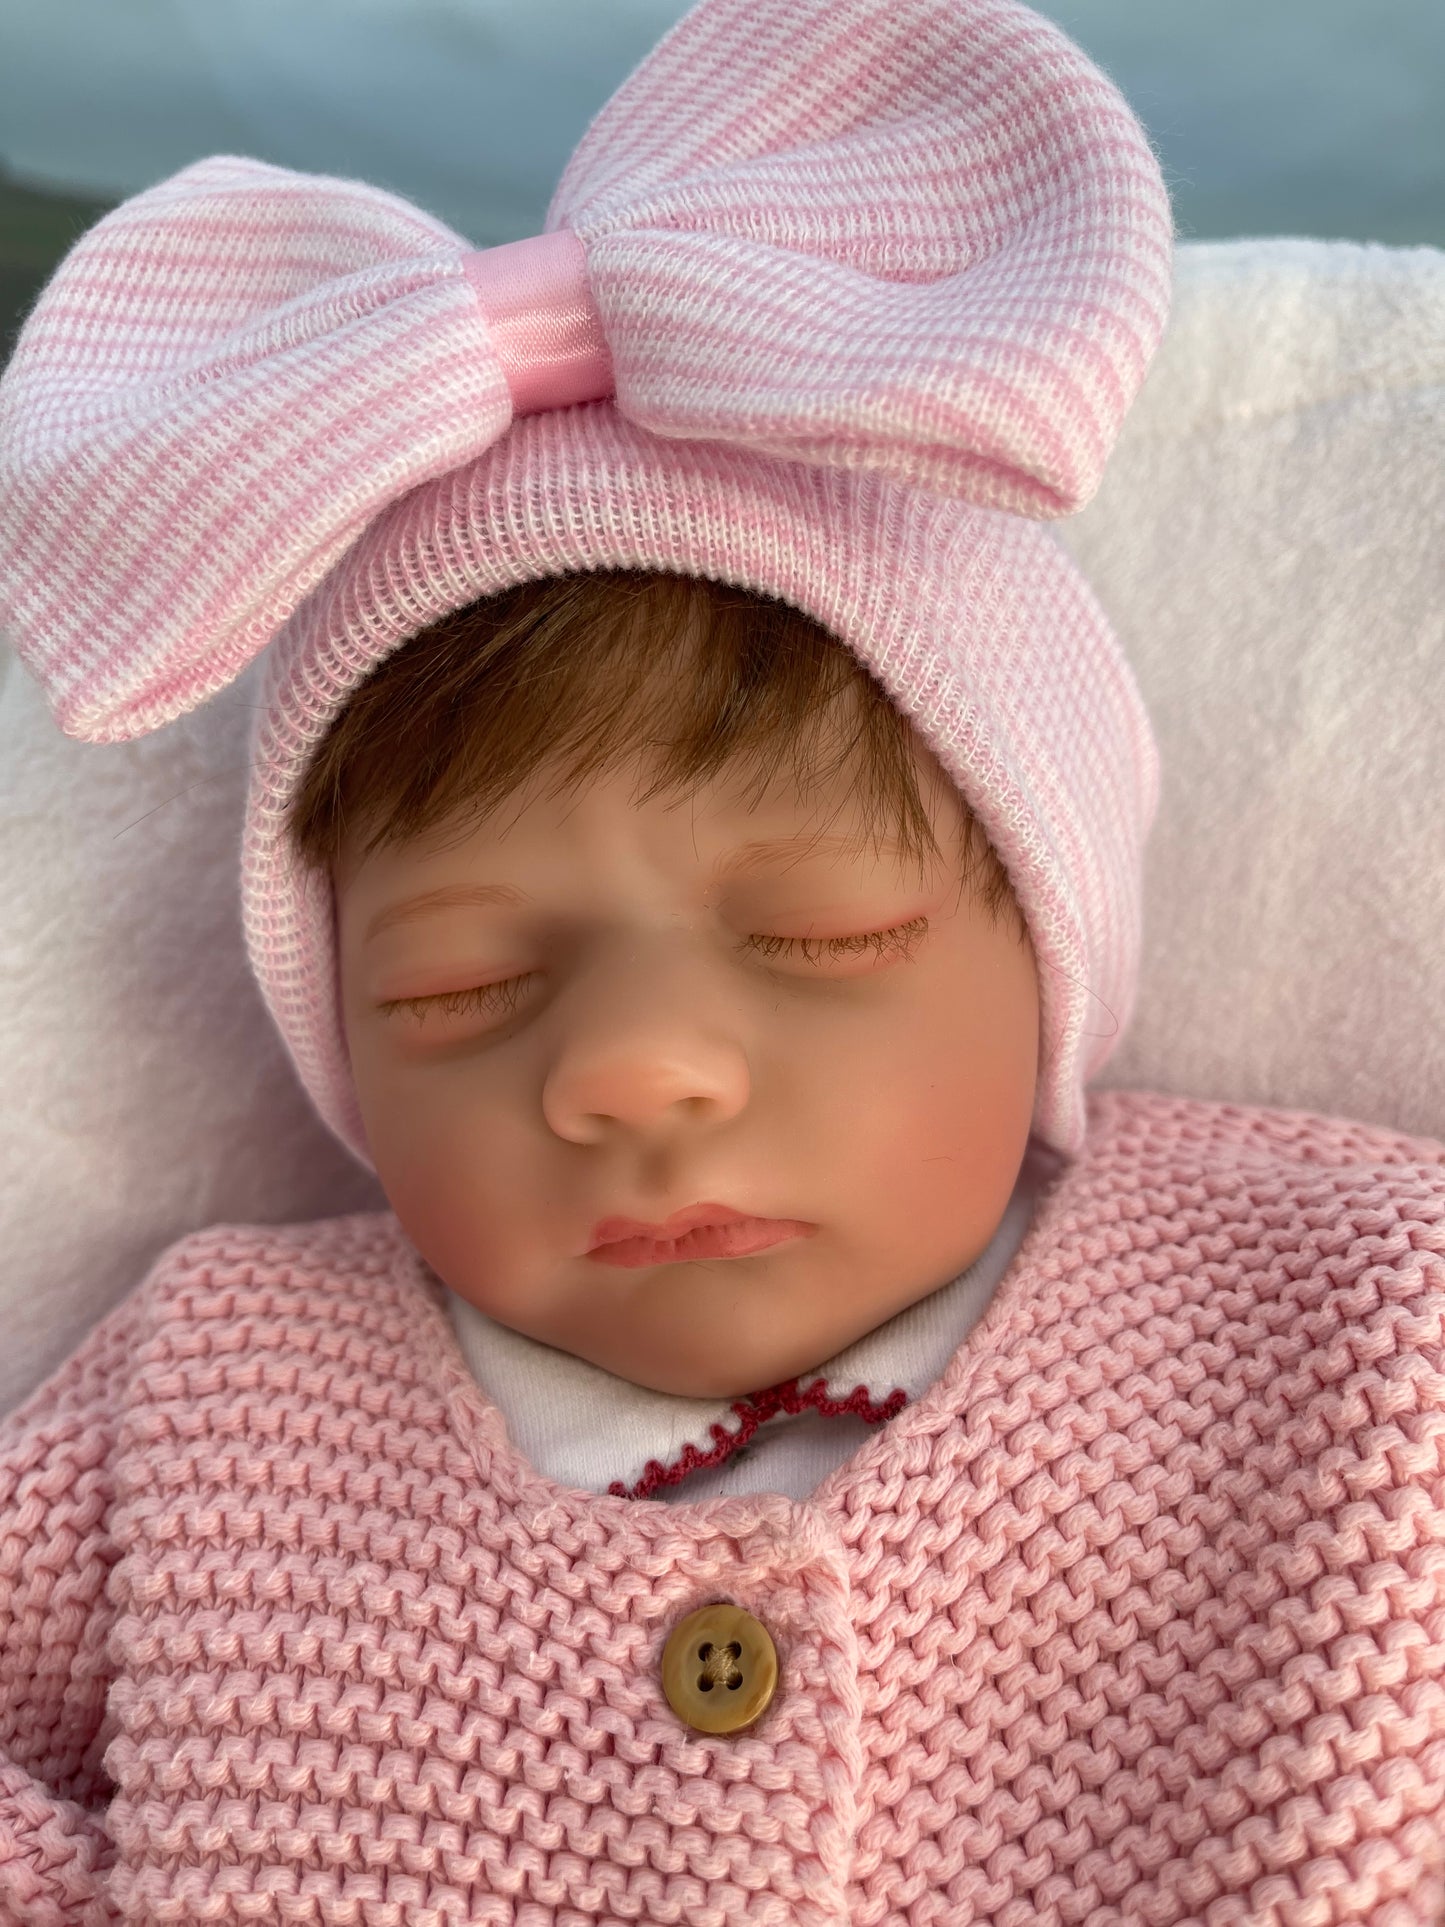 Reborn baby doll realistic and weighted